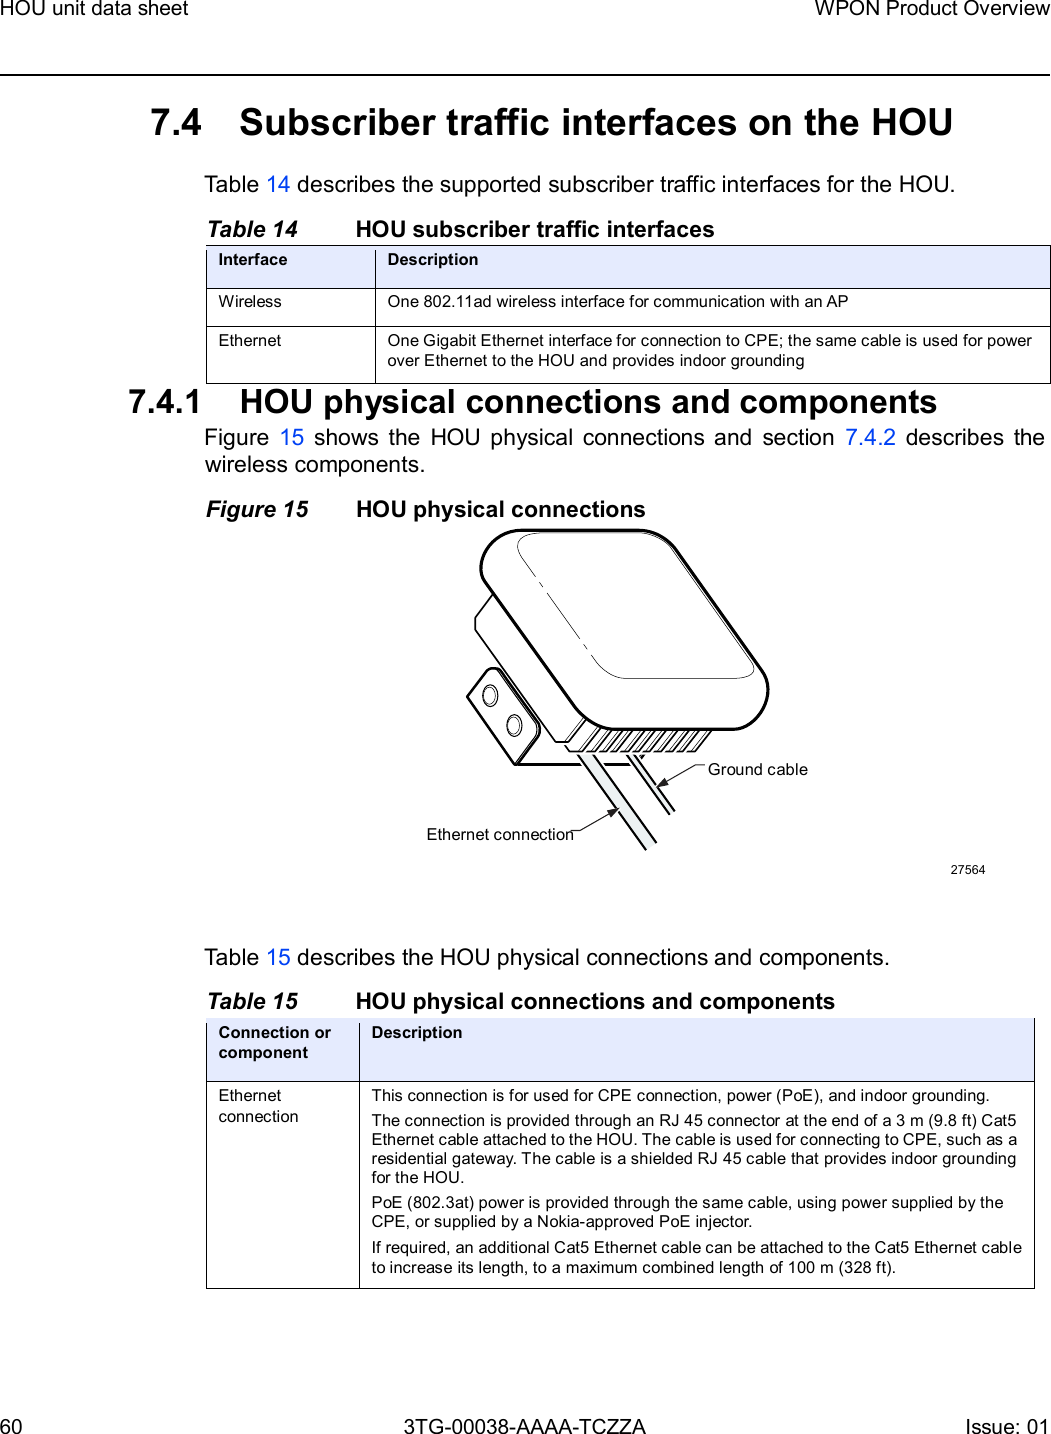 Page 60 of Nokia Bell 7577WPONAPAC WPON User Manual WPON Product Overview